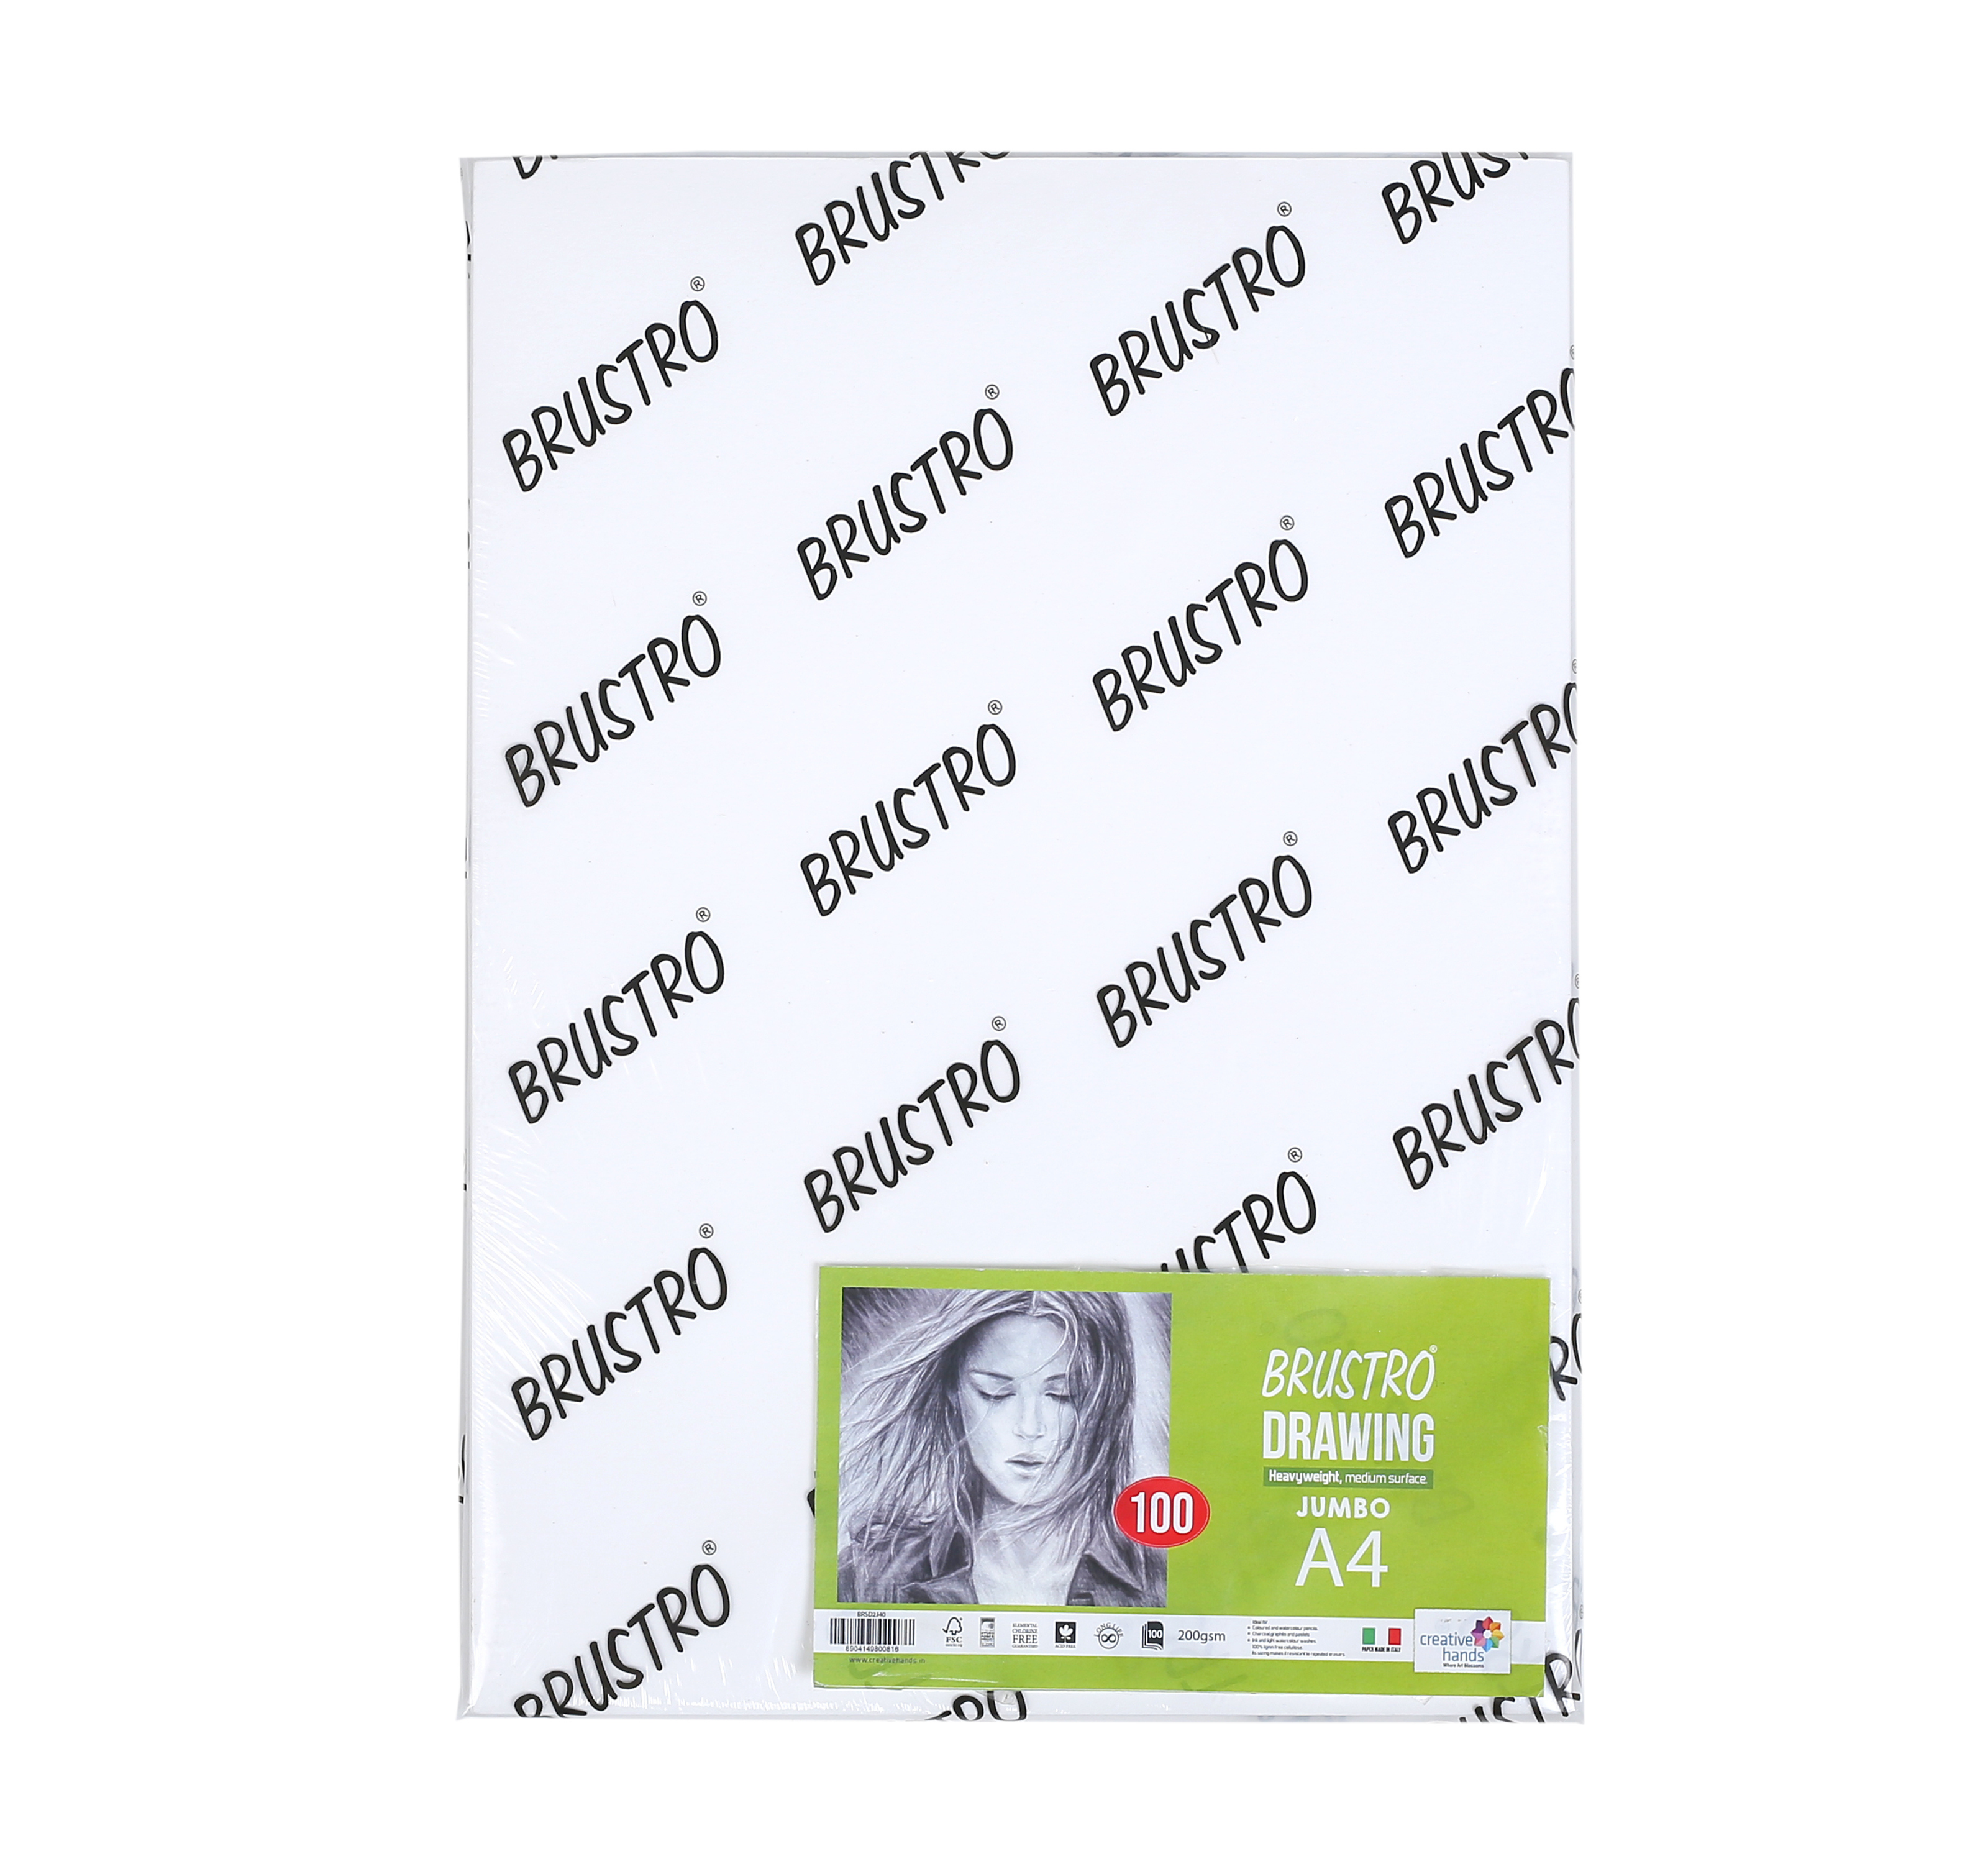 Brustro Drawing Papers 200 GSM A4, Pack of 20 + 4 Free Sheets